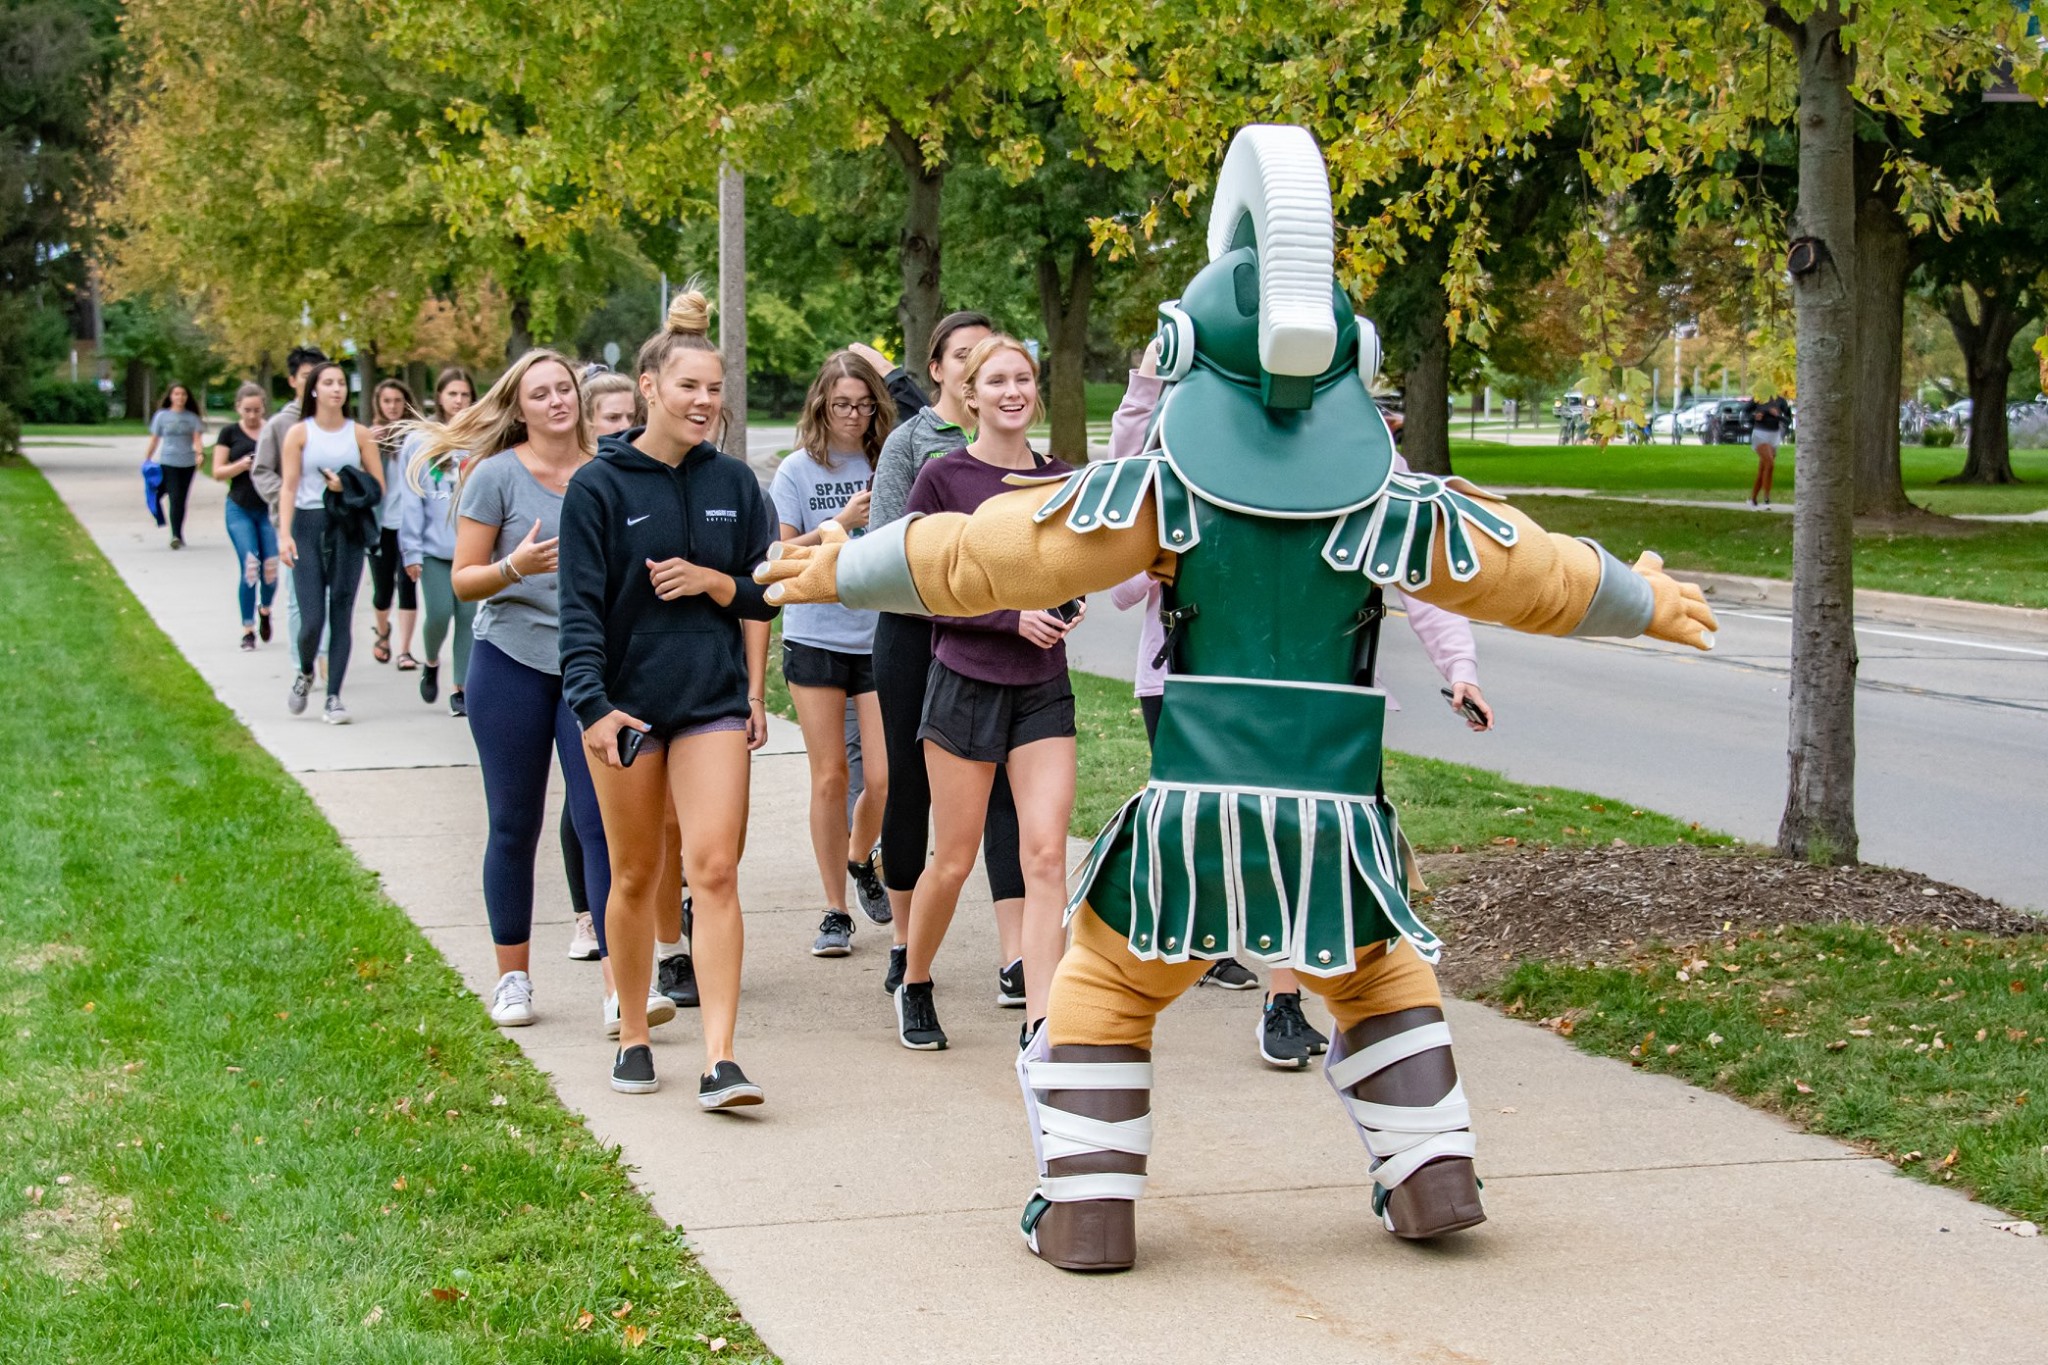 7th annual Healthy Walk to take place Oct. 12 MSUToday